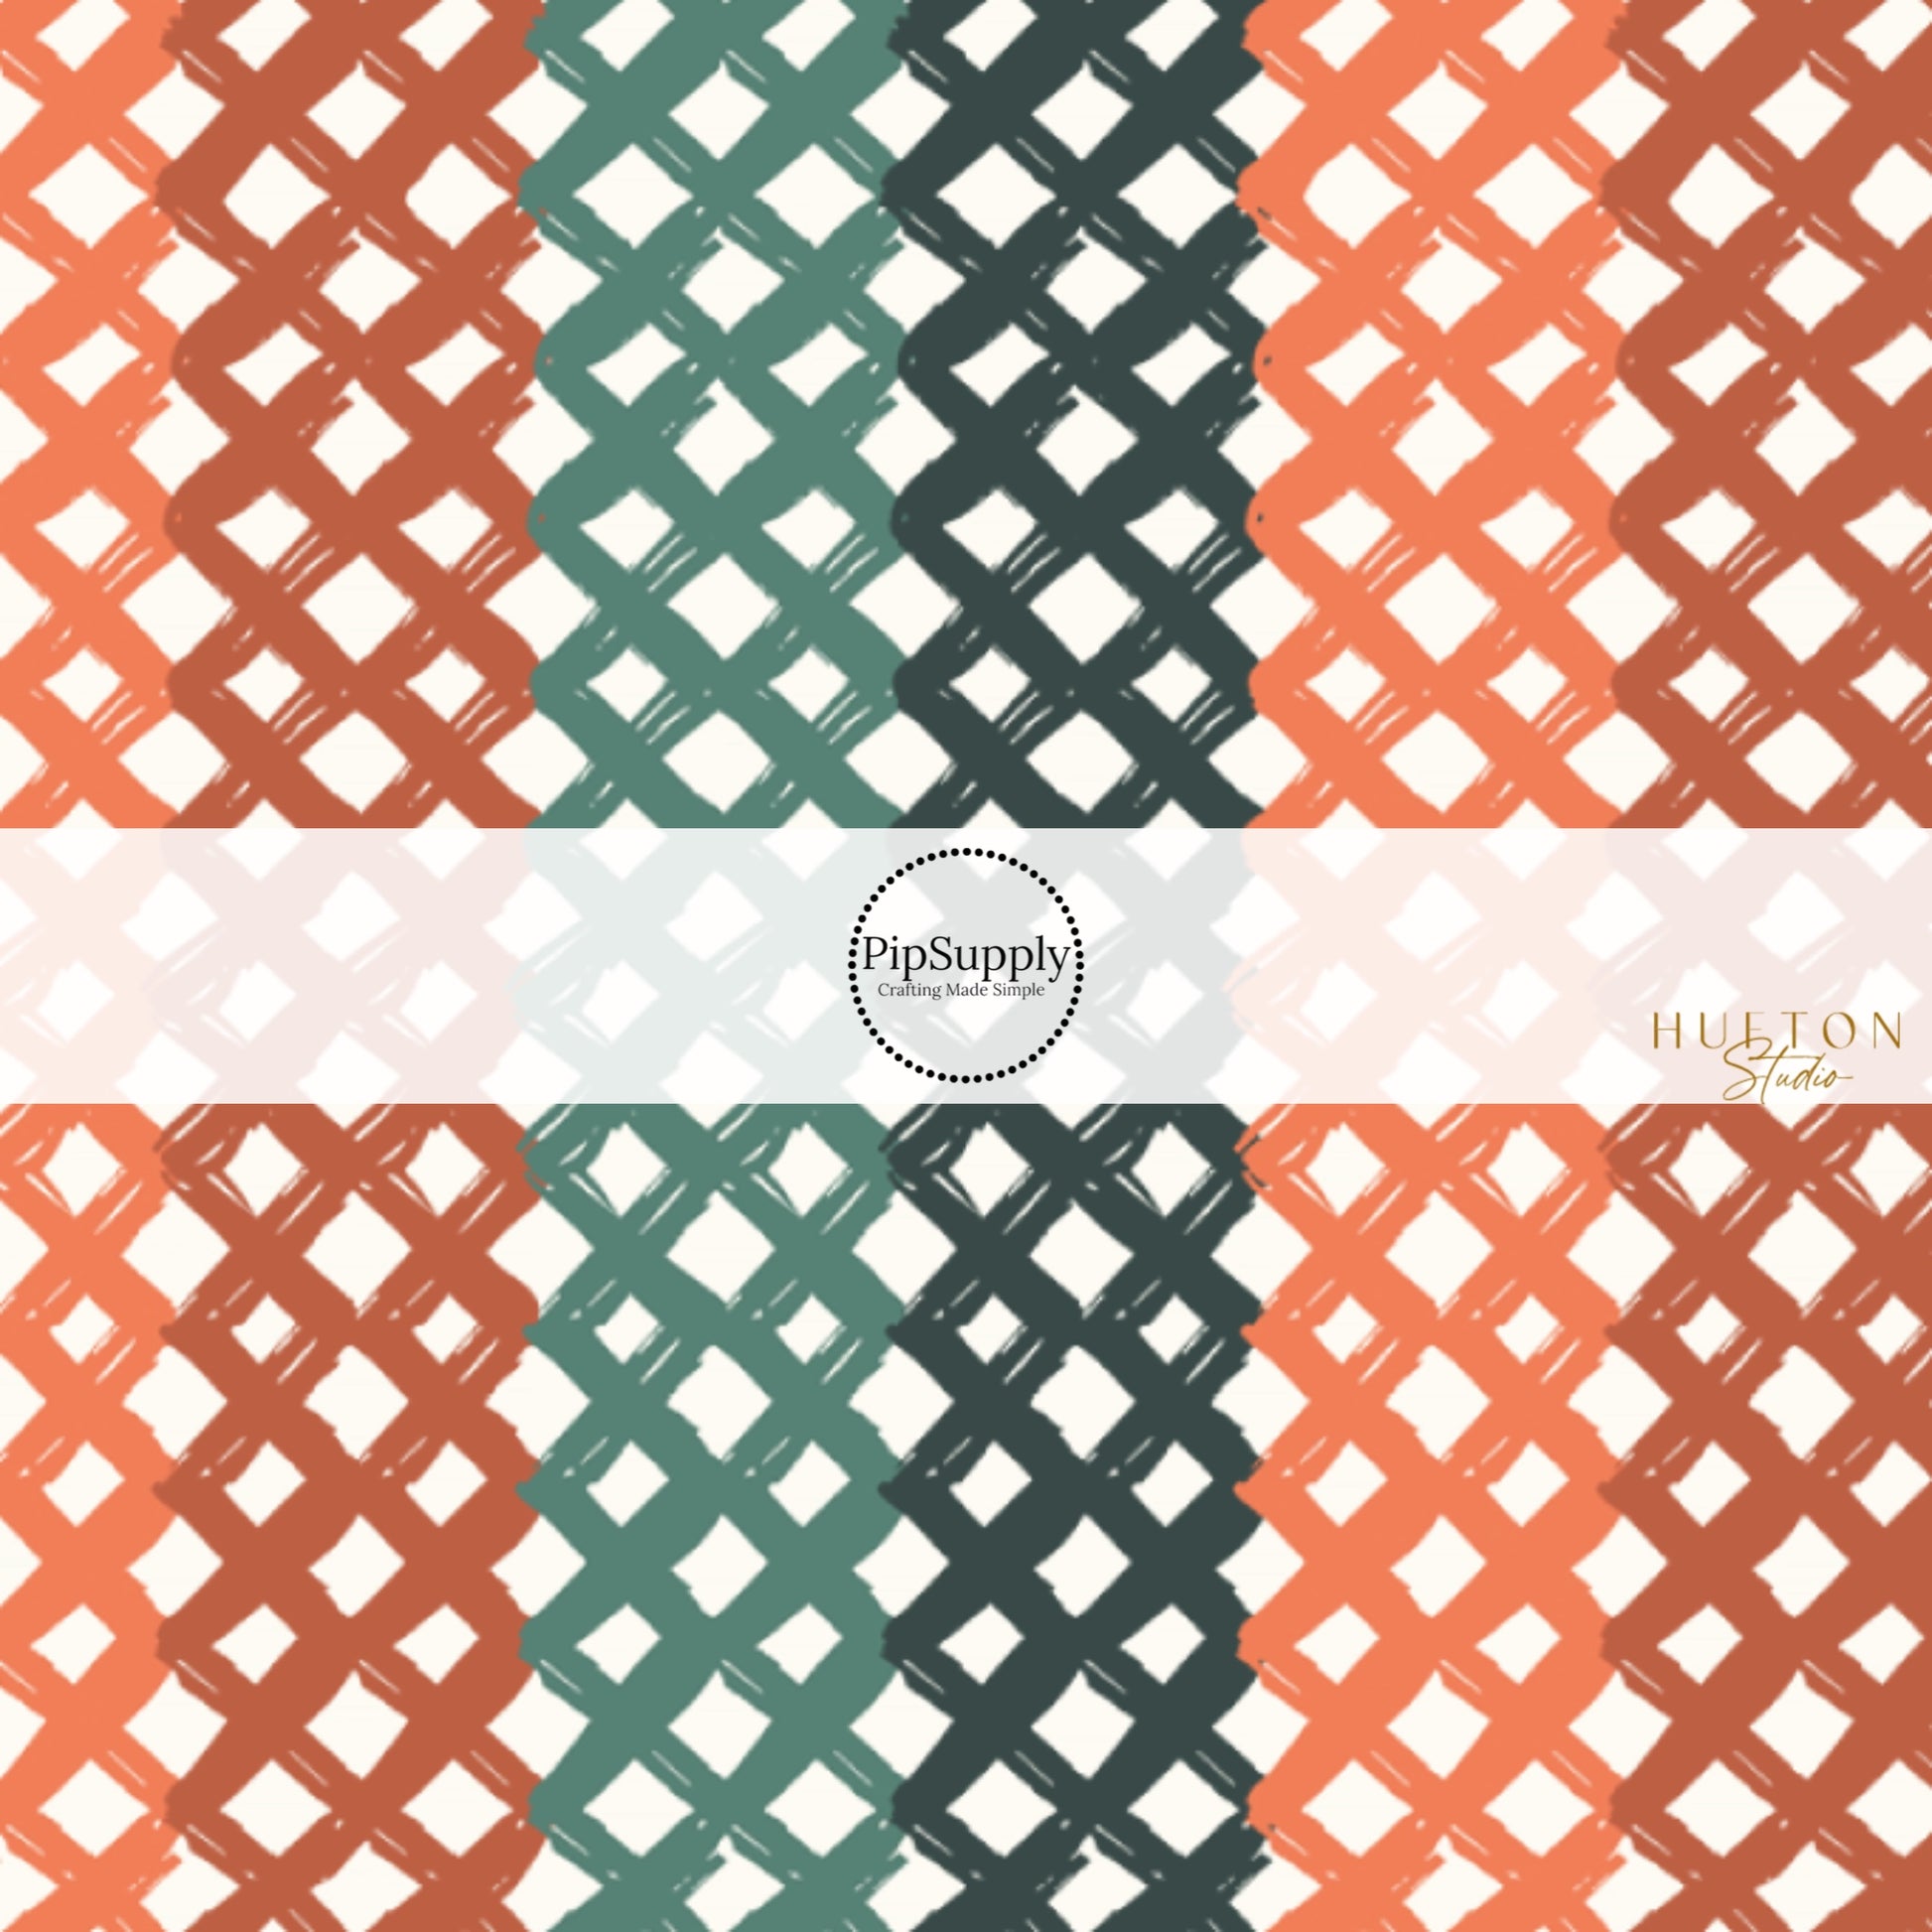 These fall lattice themed fabric by the yard features crisscross stripe pattern in orange, rust, green, and dark green. This fun lattice themed fabric can be used for all your sewing and crafting needs! 